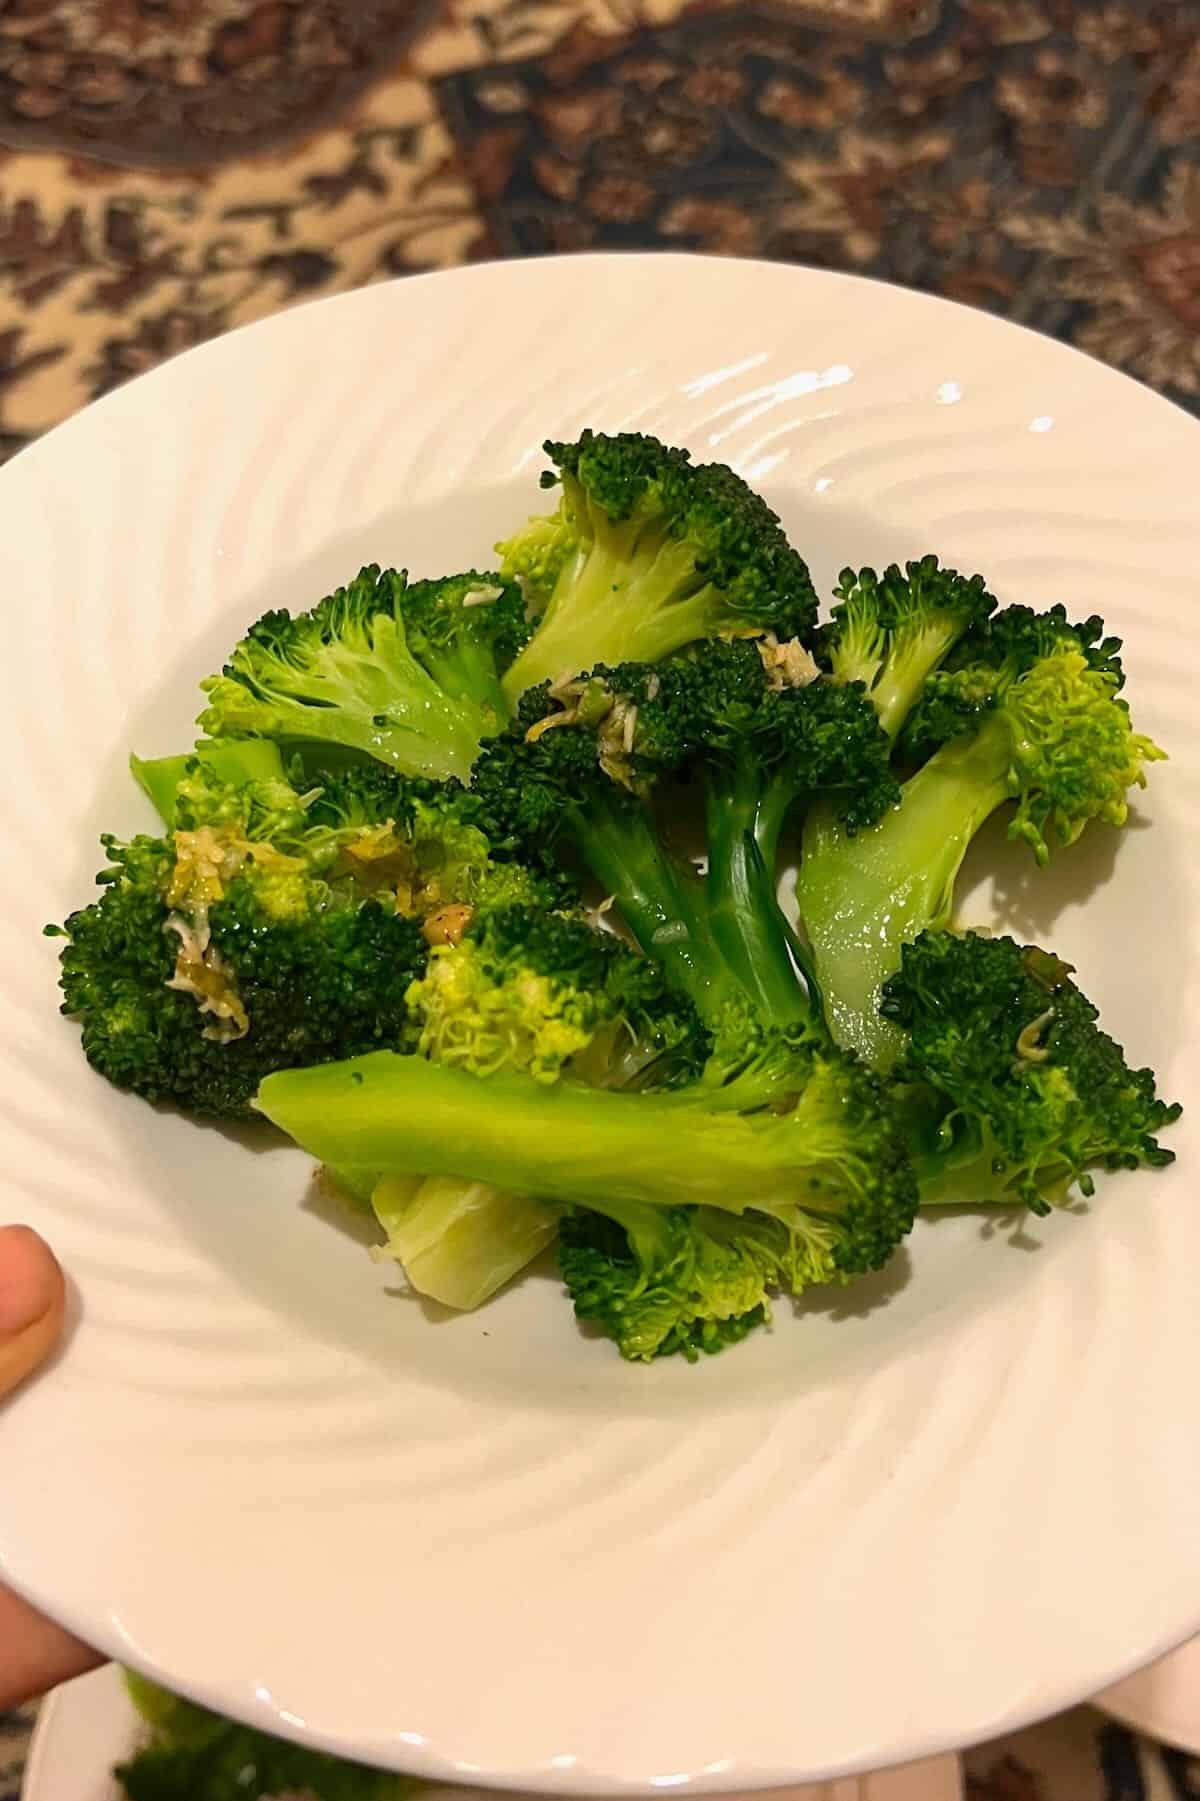 Broccoli topped with lemon butter sauce